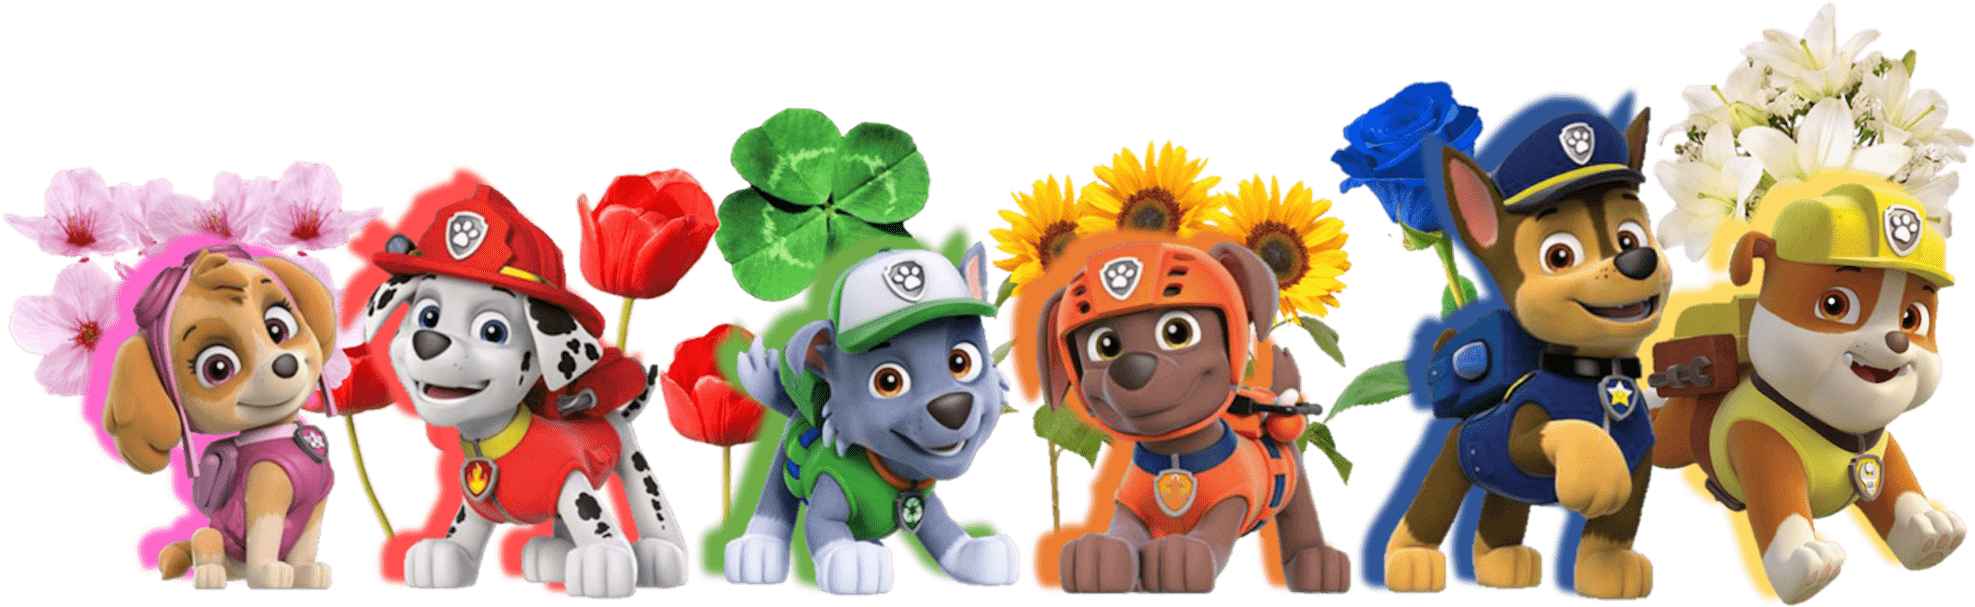 Paw Patrol Characters Floral Backdrop